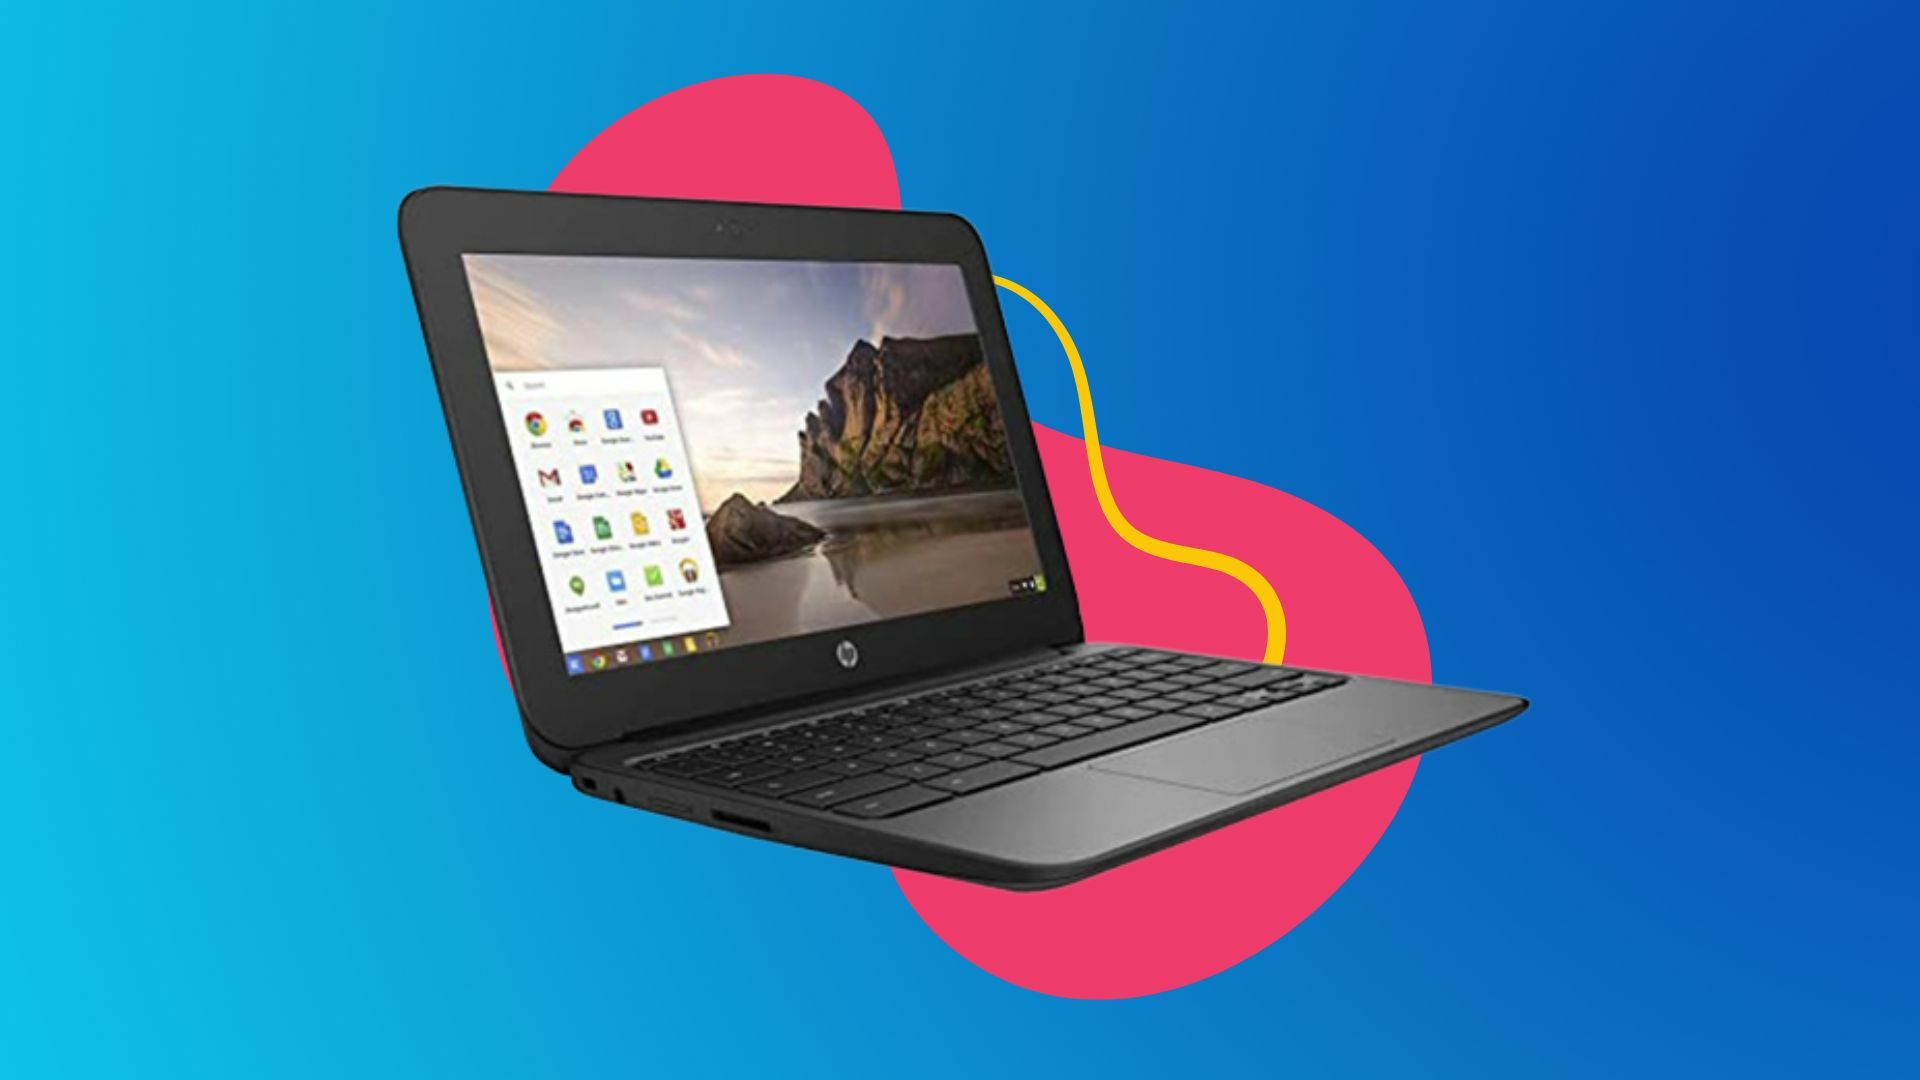 Refurbished HP Business Chromebook 16GB on a colorful background.